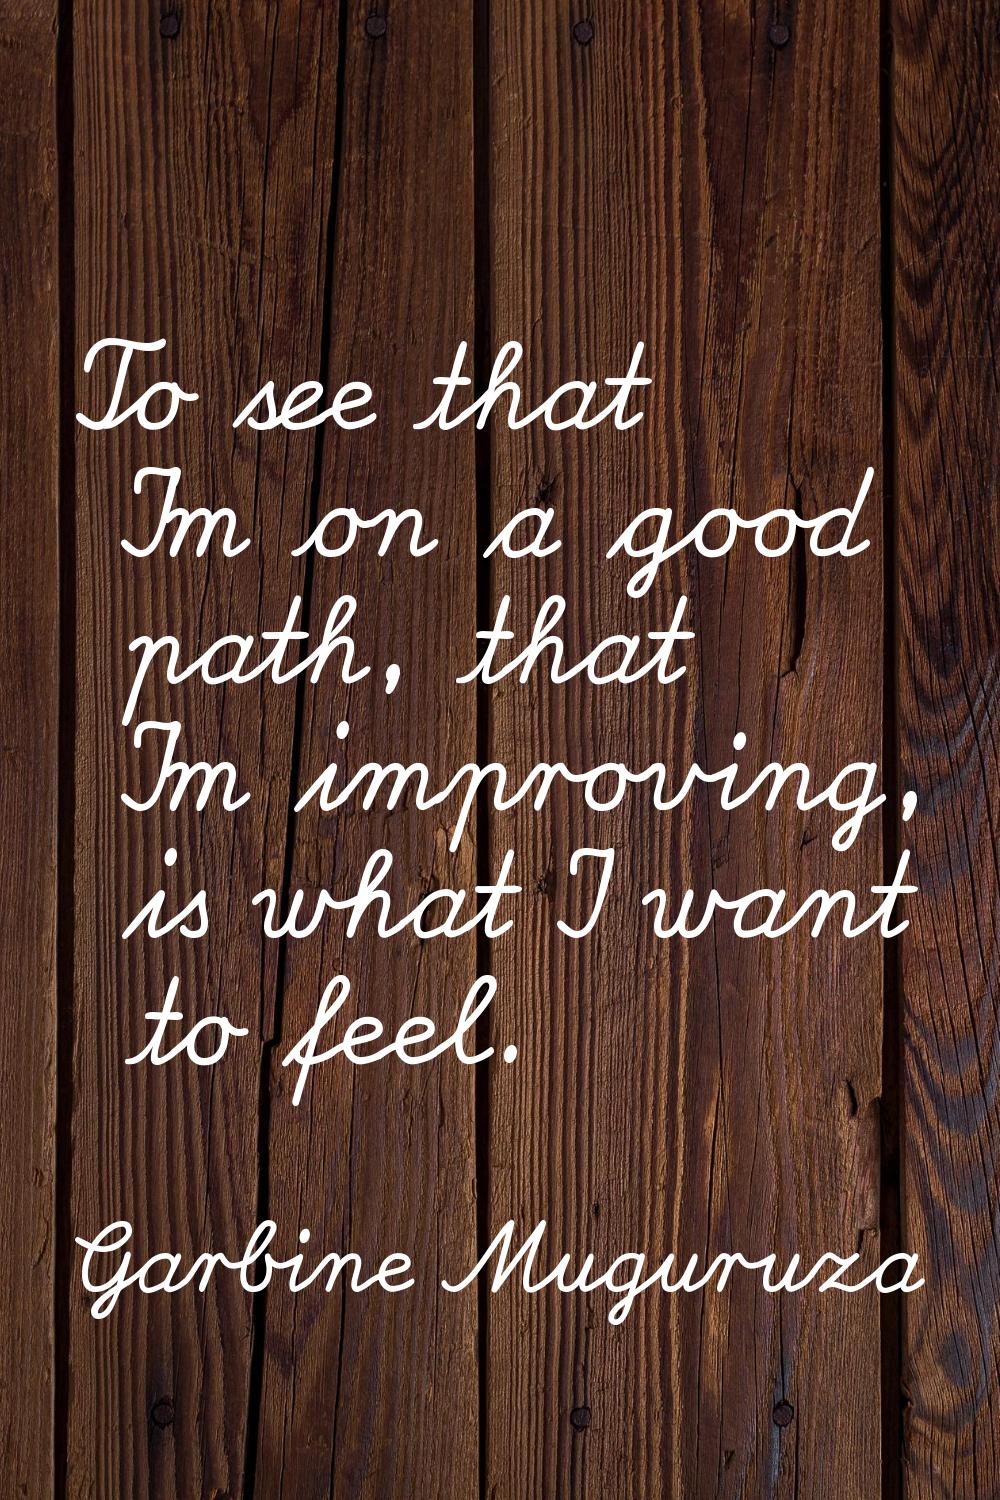 To see that I'm on a good path, that I'm improving, is what I want to feel.